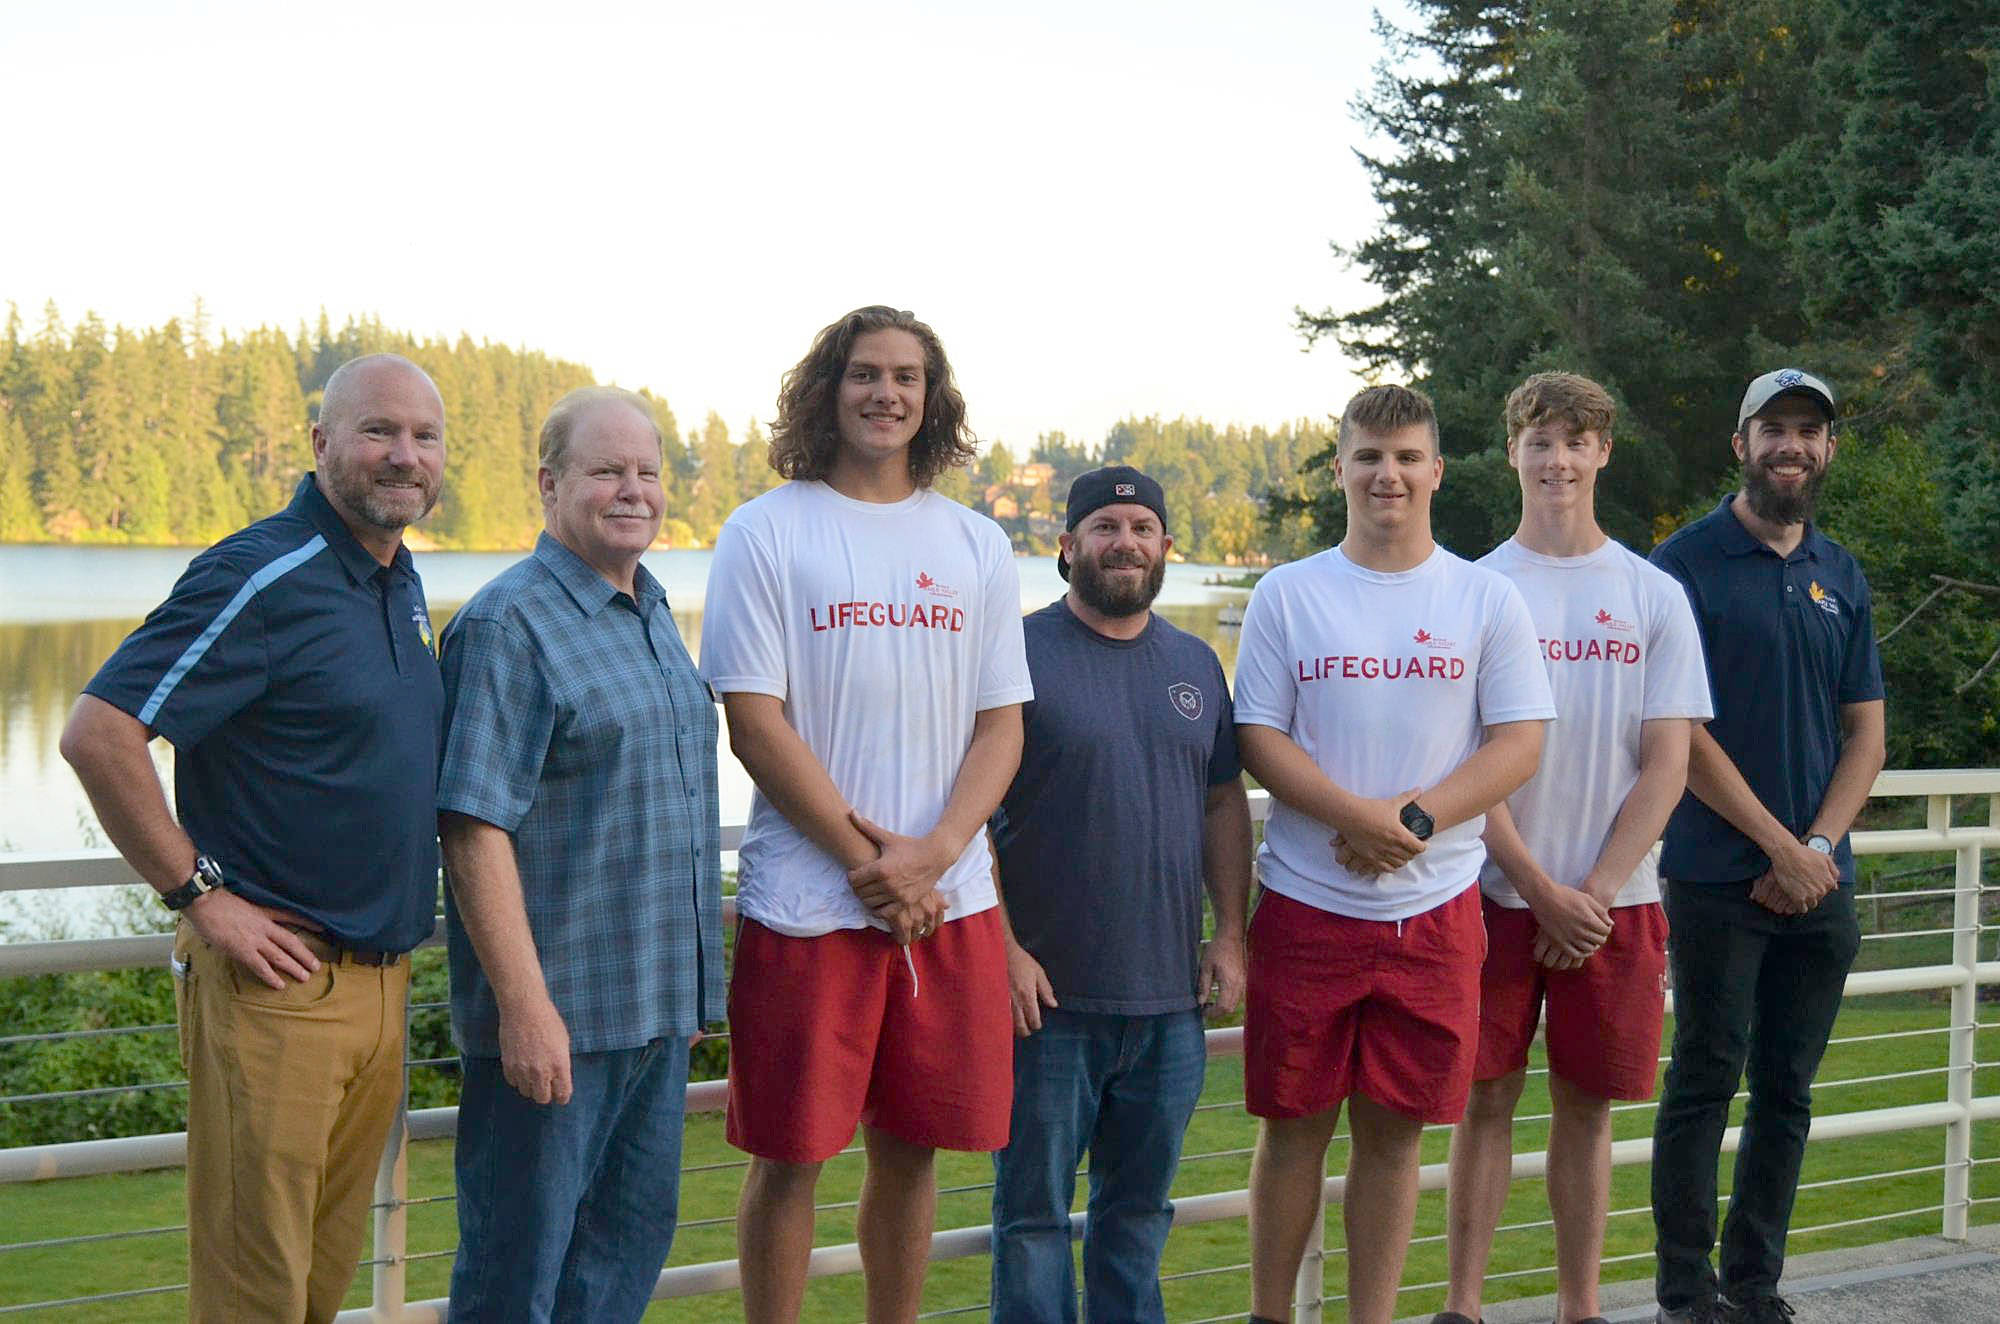 Pictured from left to right: Dave Johnson, Parks director, Mark Ratcliff, Recreation manager, Aaron “Gabe” Marienau, lifeguard, Chris Terril, HO Sports, Devin Deyerin, lifeguard, Lucas Adams, lifeguard,- and Karsten Steinmeyer, beach manager. Not pictured: Sierra Clemens. Courtesy photo